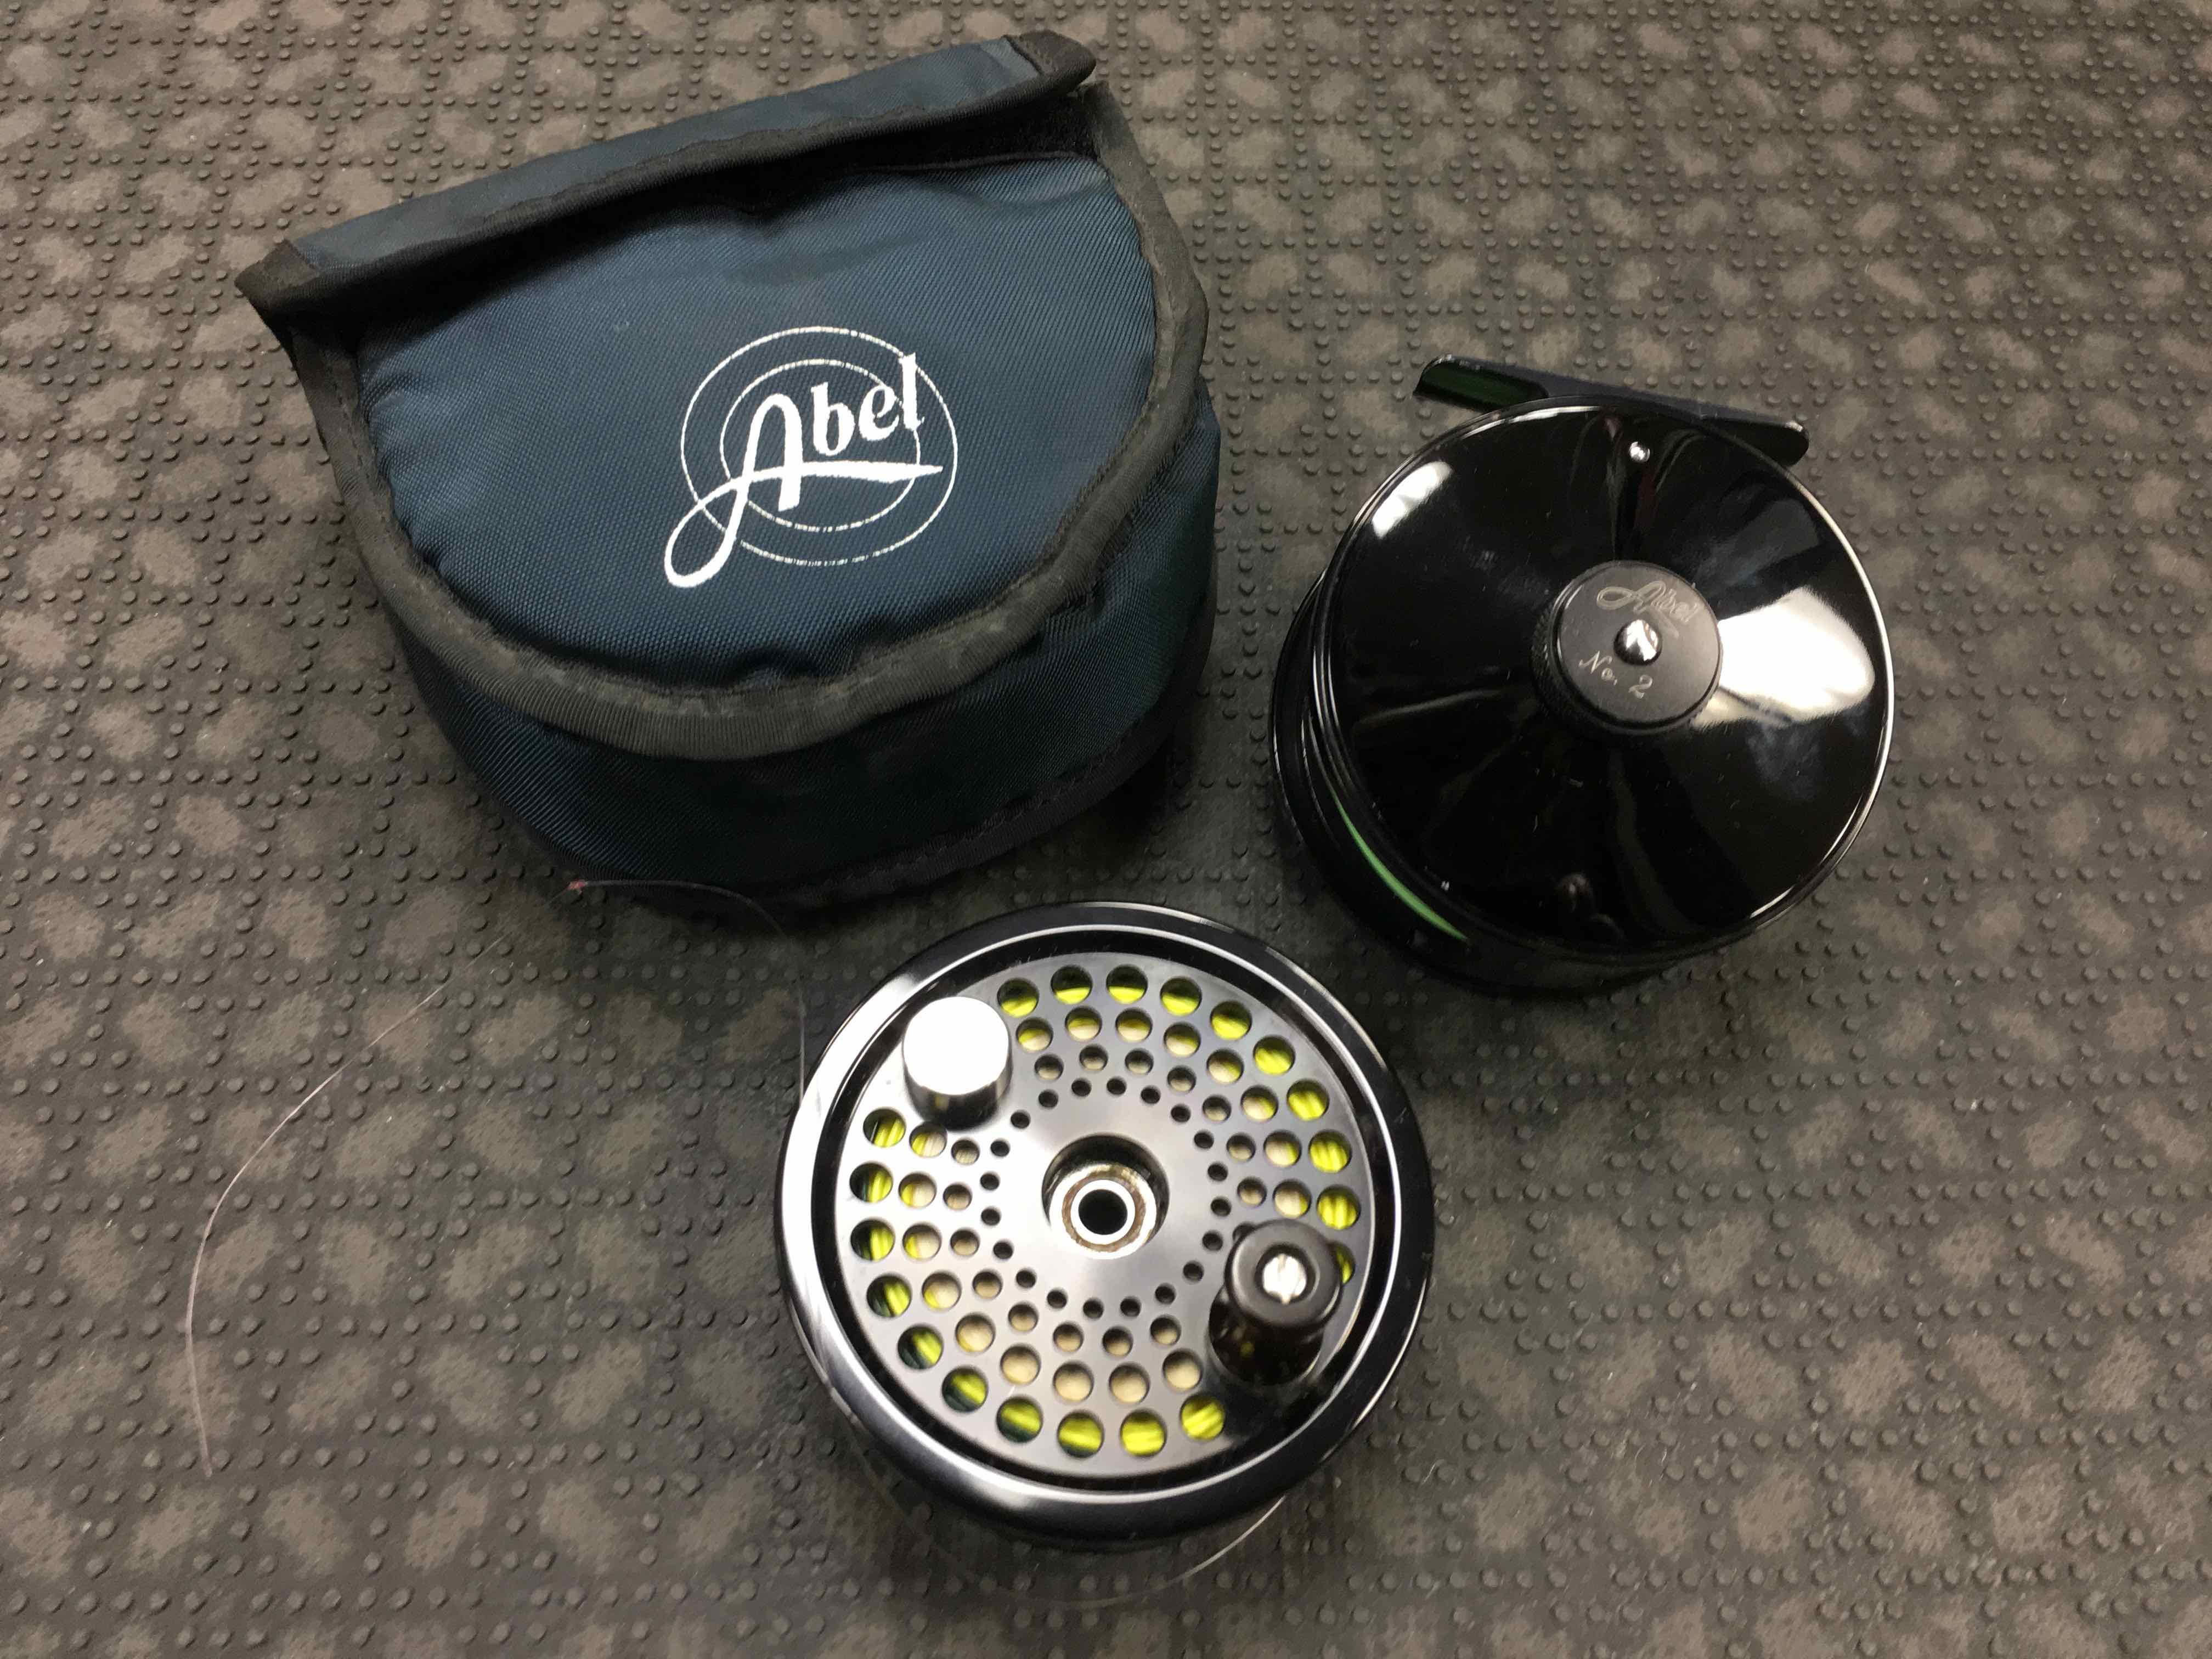 https://thefirstcast.ca/wp-content/uploads/2017/05/Abel-No-2-Fly-Reel-with-Spare-Spool-and-Two-RIO-Fly-Lines-BB.jpg